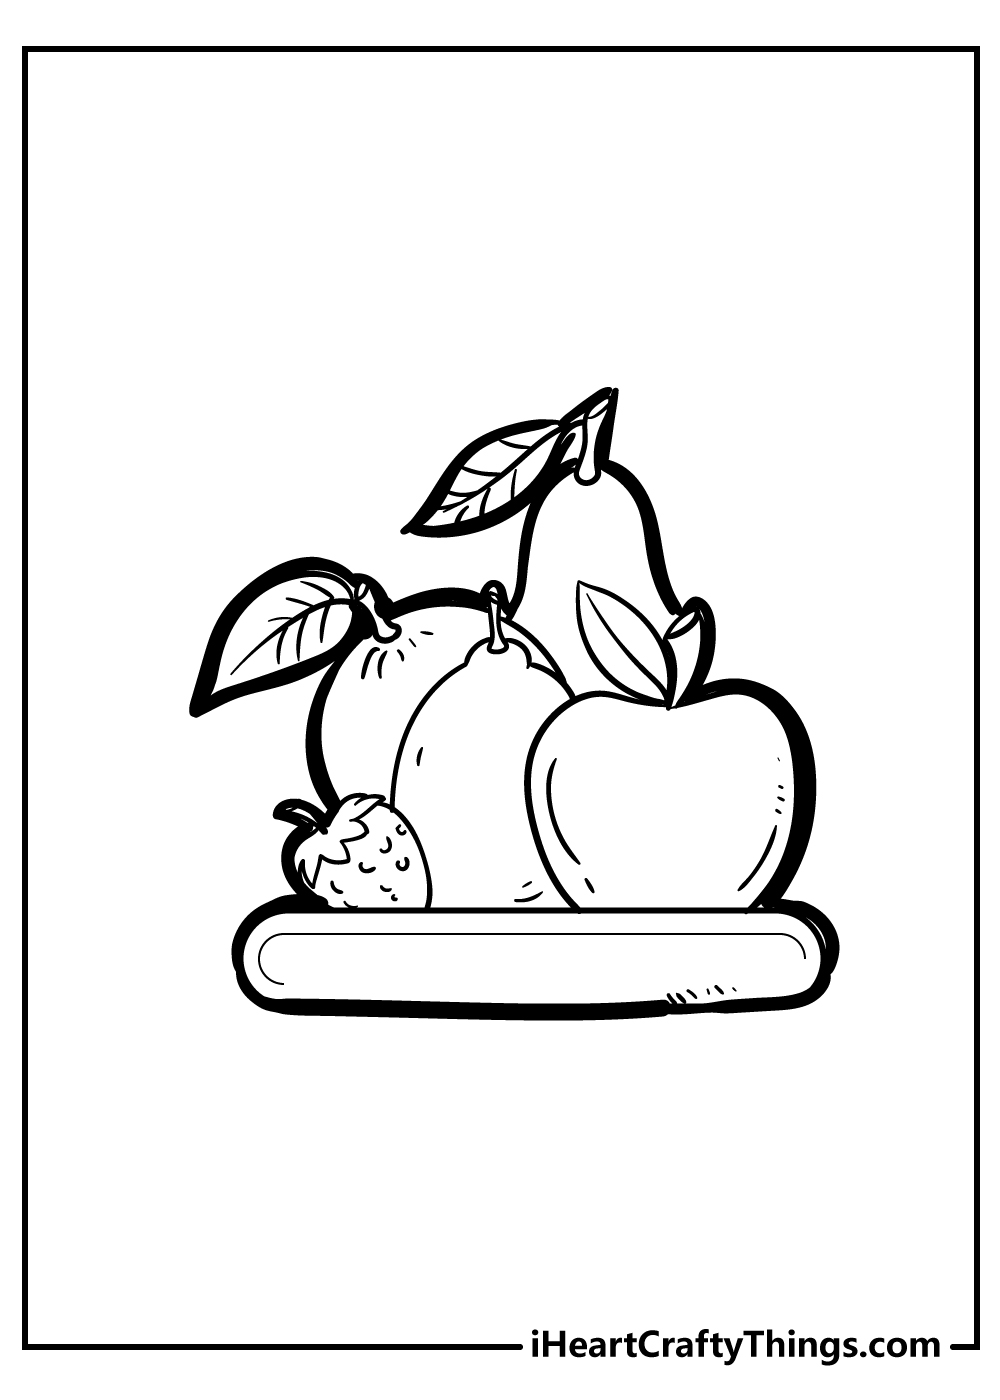 Fruit Coloring Pages free pdf download